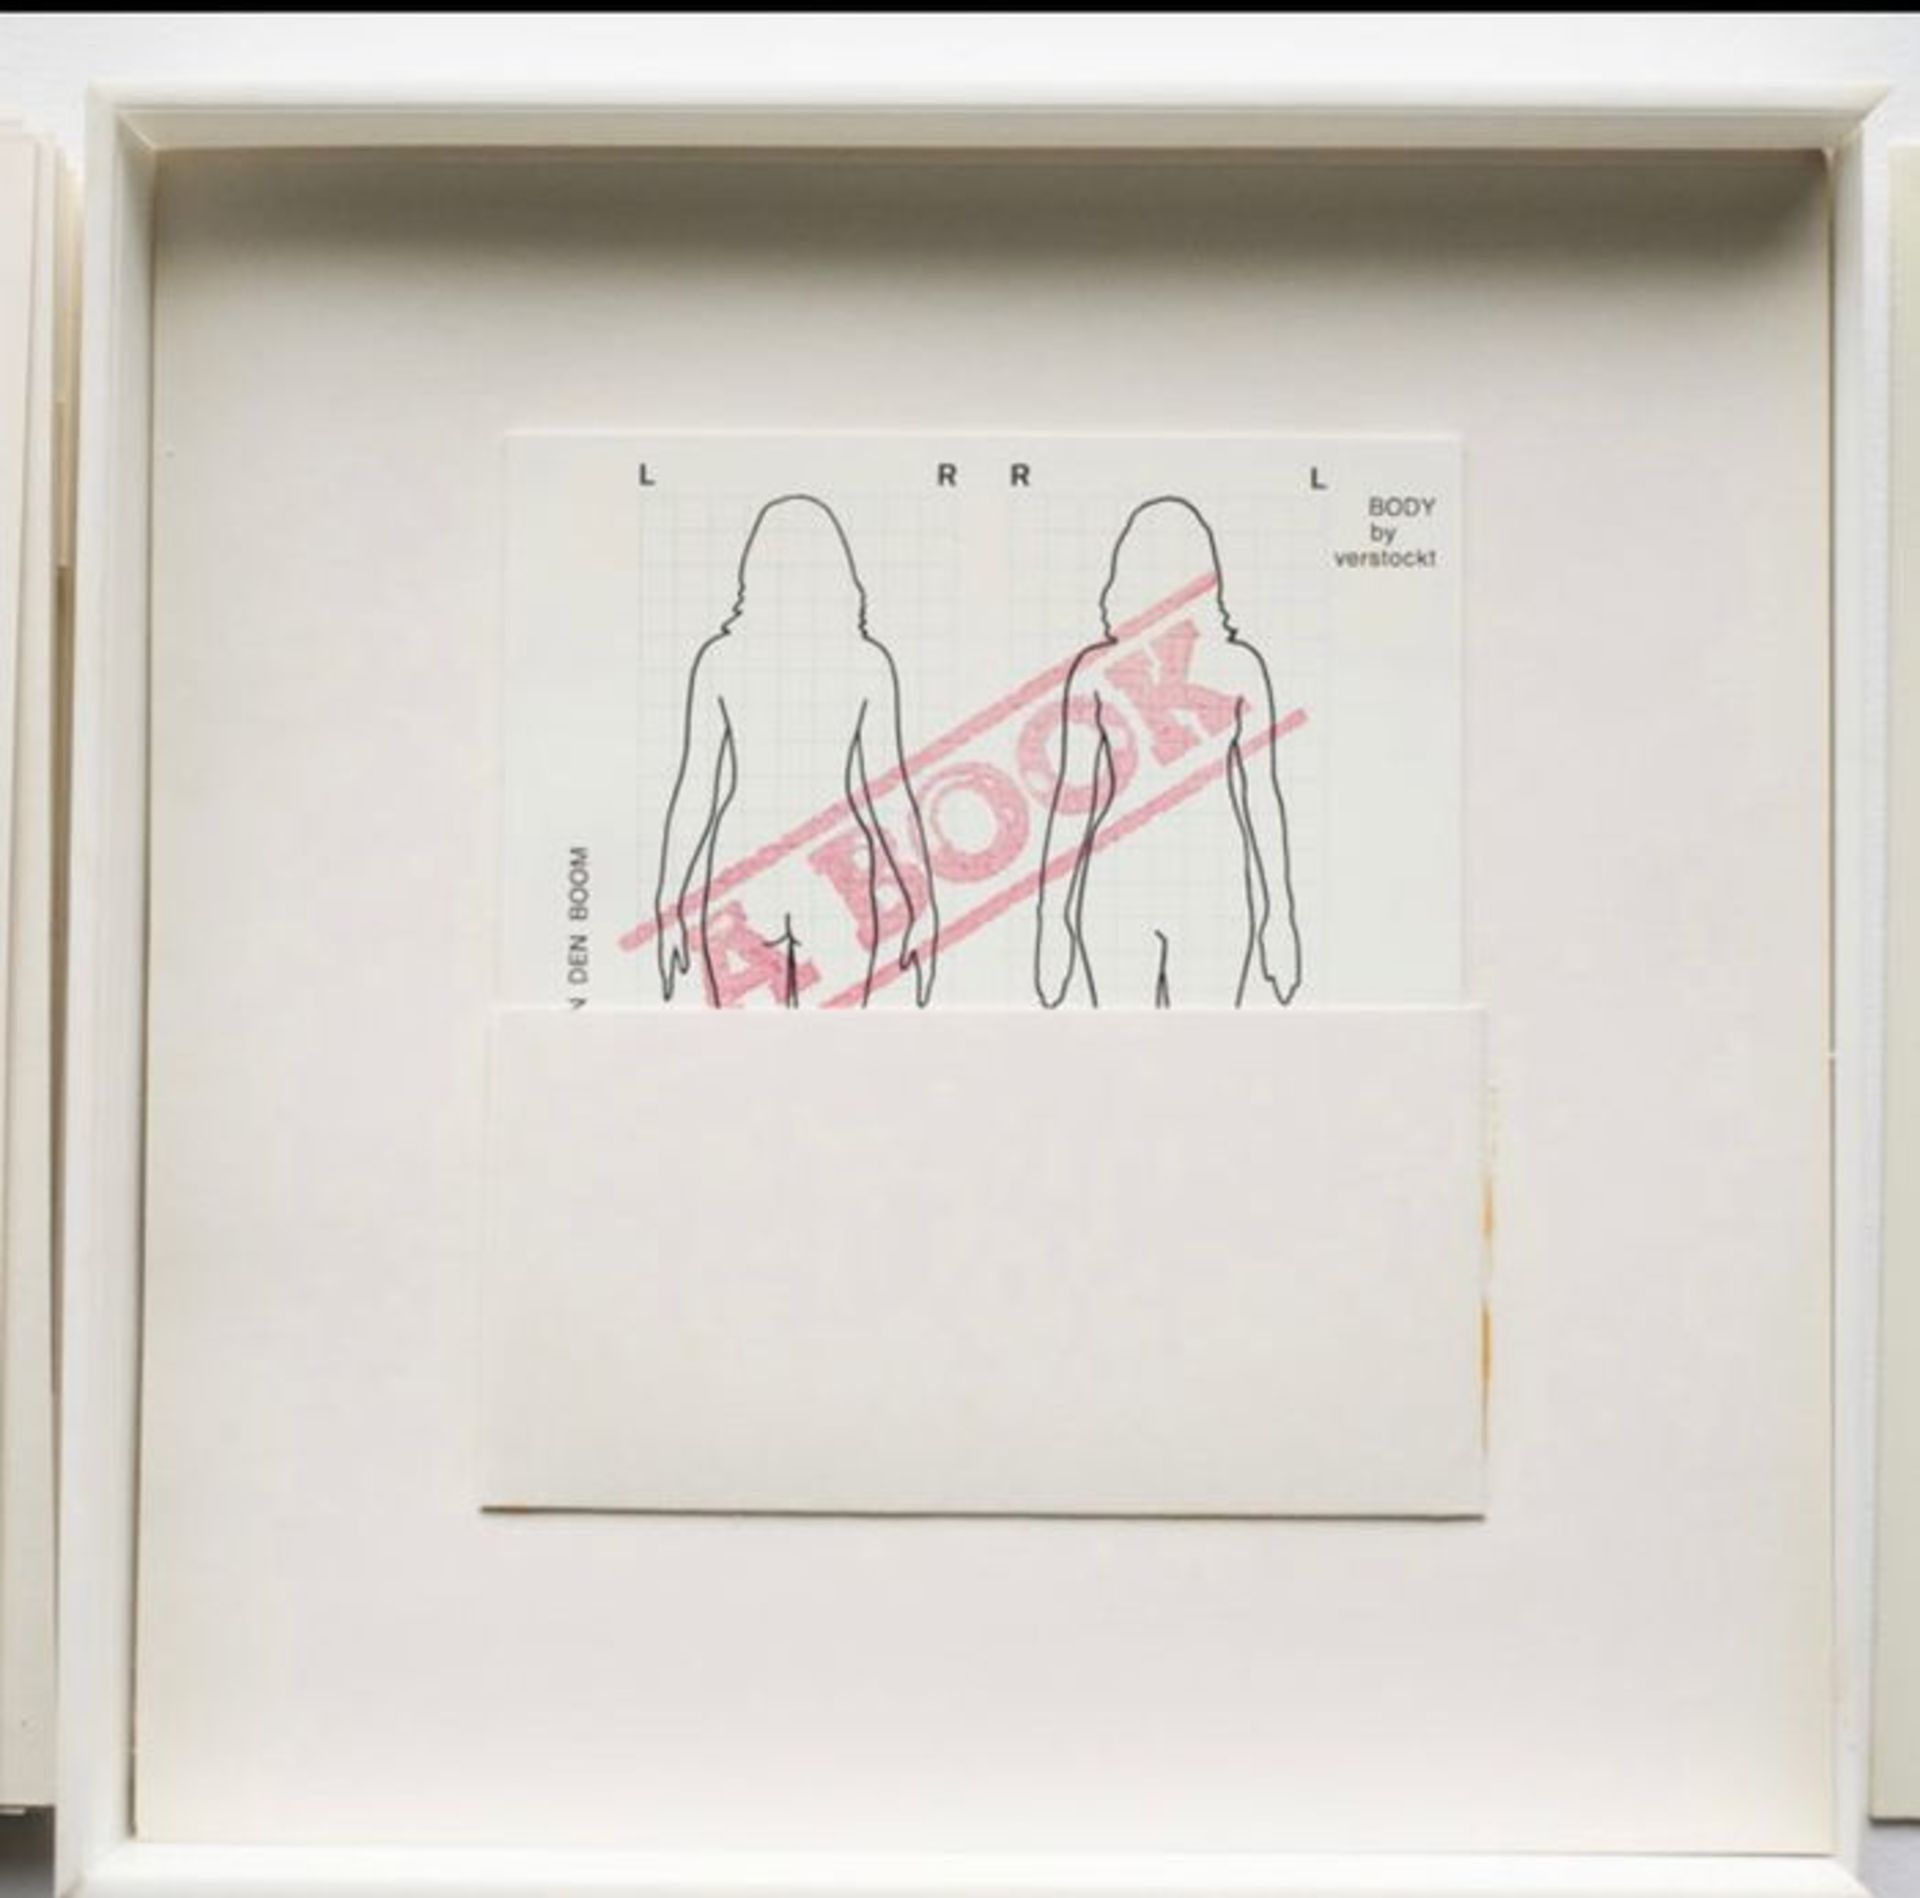 |Art|Verstockt Mark, "This is not a book", limited & signed, 1971 - Image 7 of 10